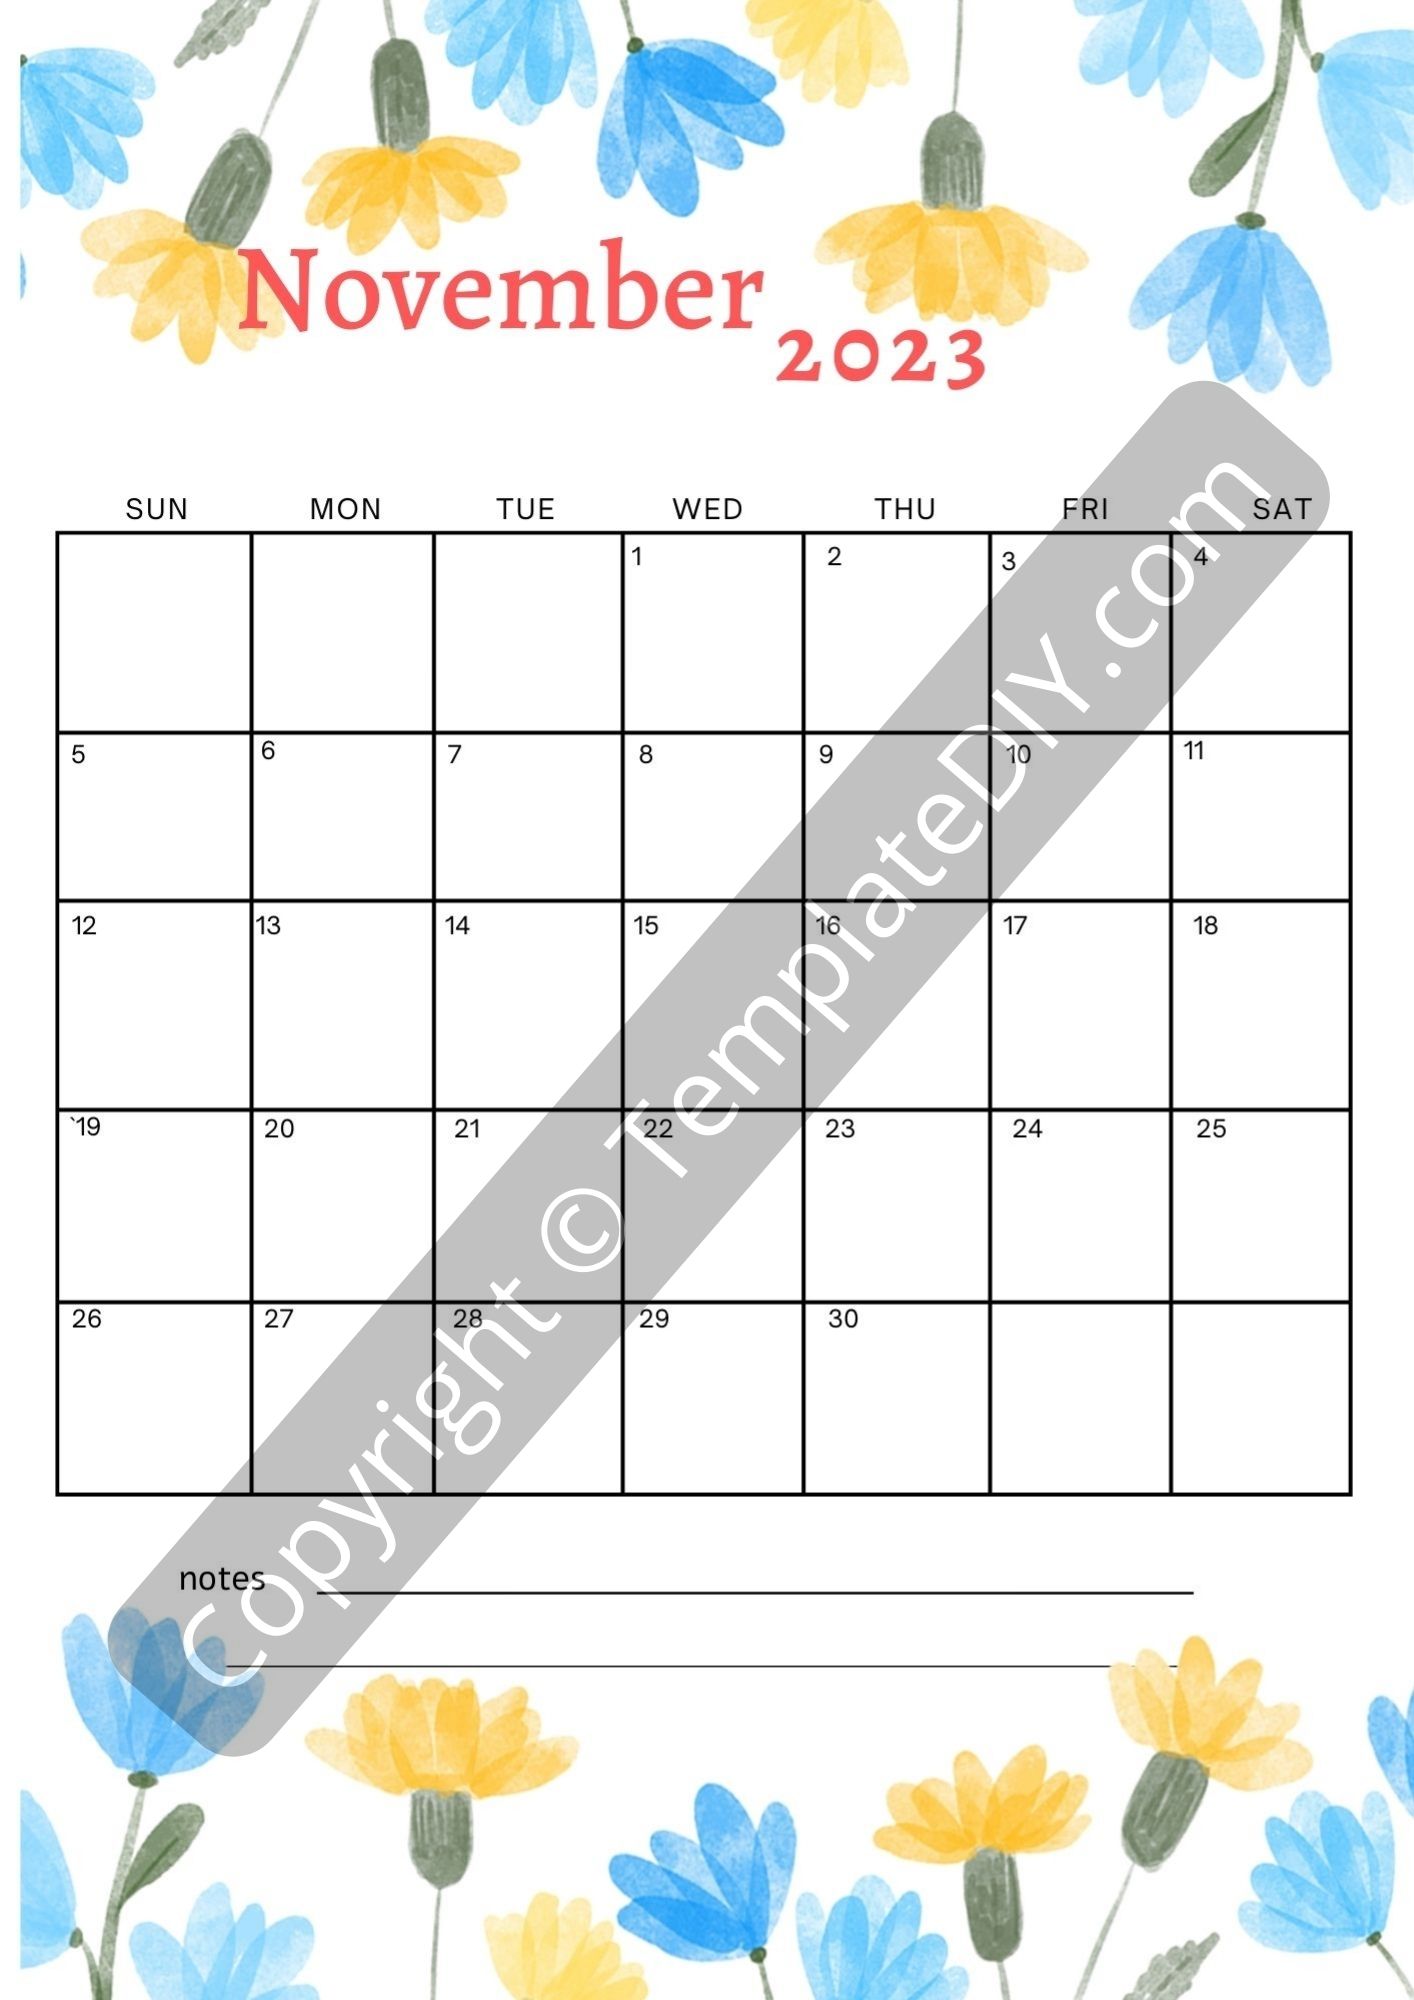 November 2023 Calendar Template With Holidays In Pdf And Excel 9087